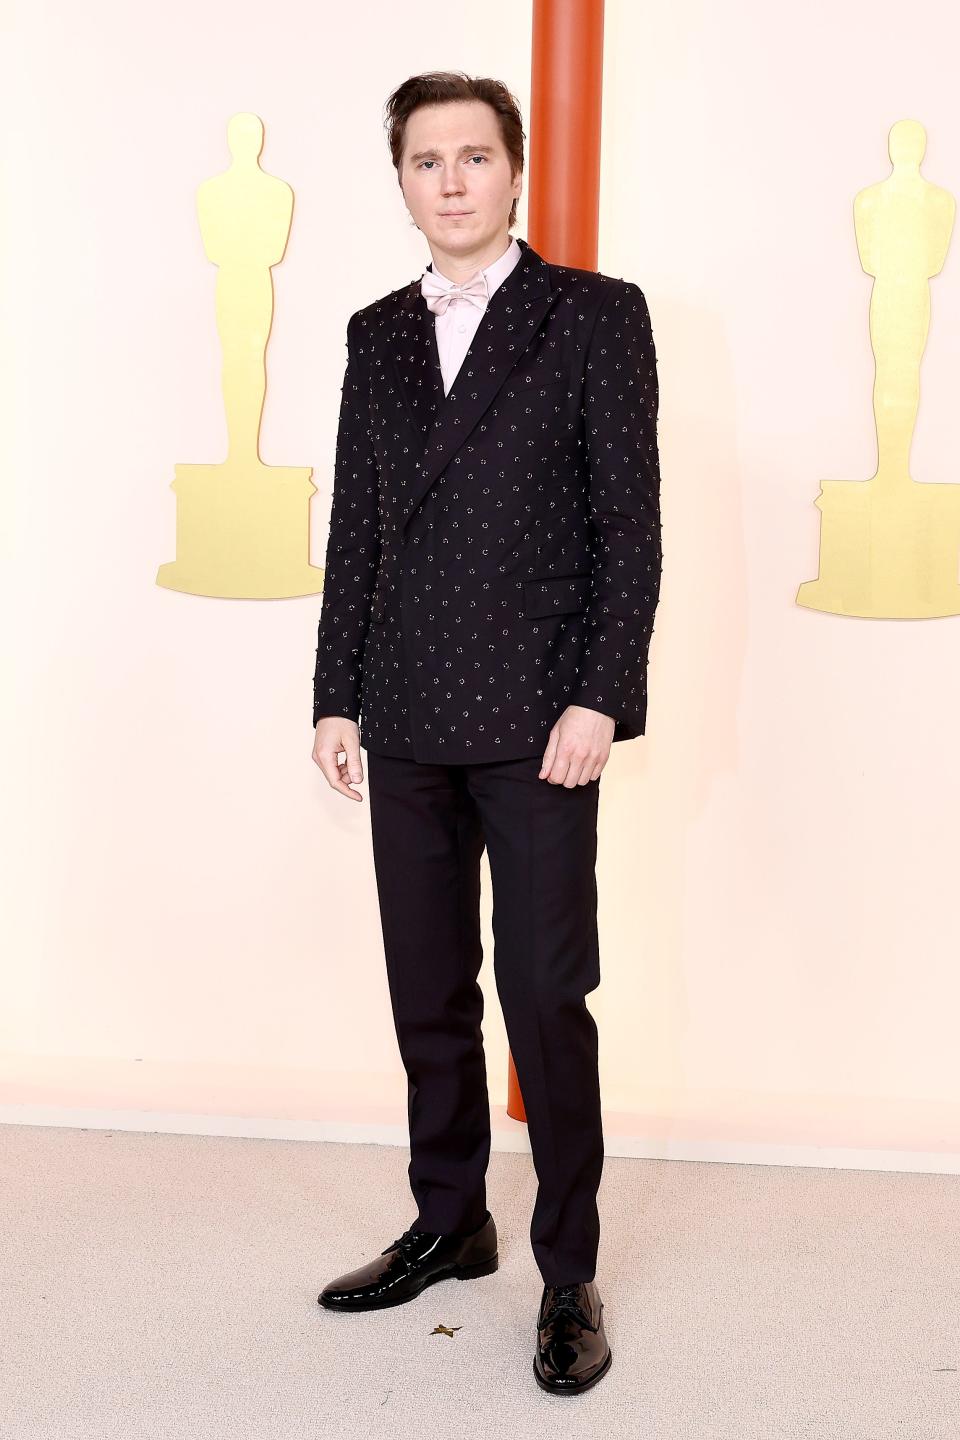 Paul Dano attends the 2023 Academy Awards.